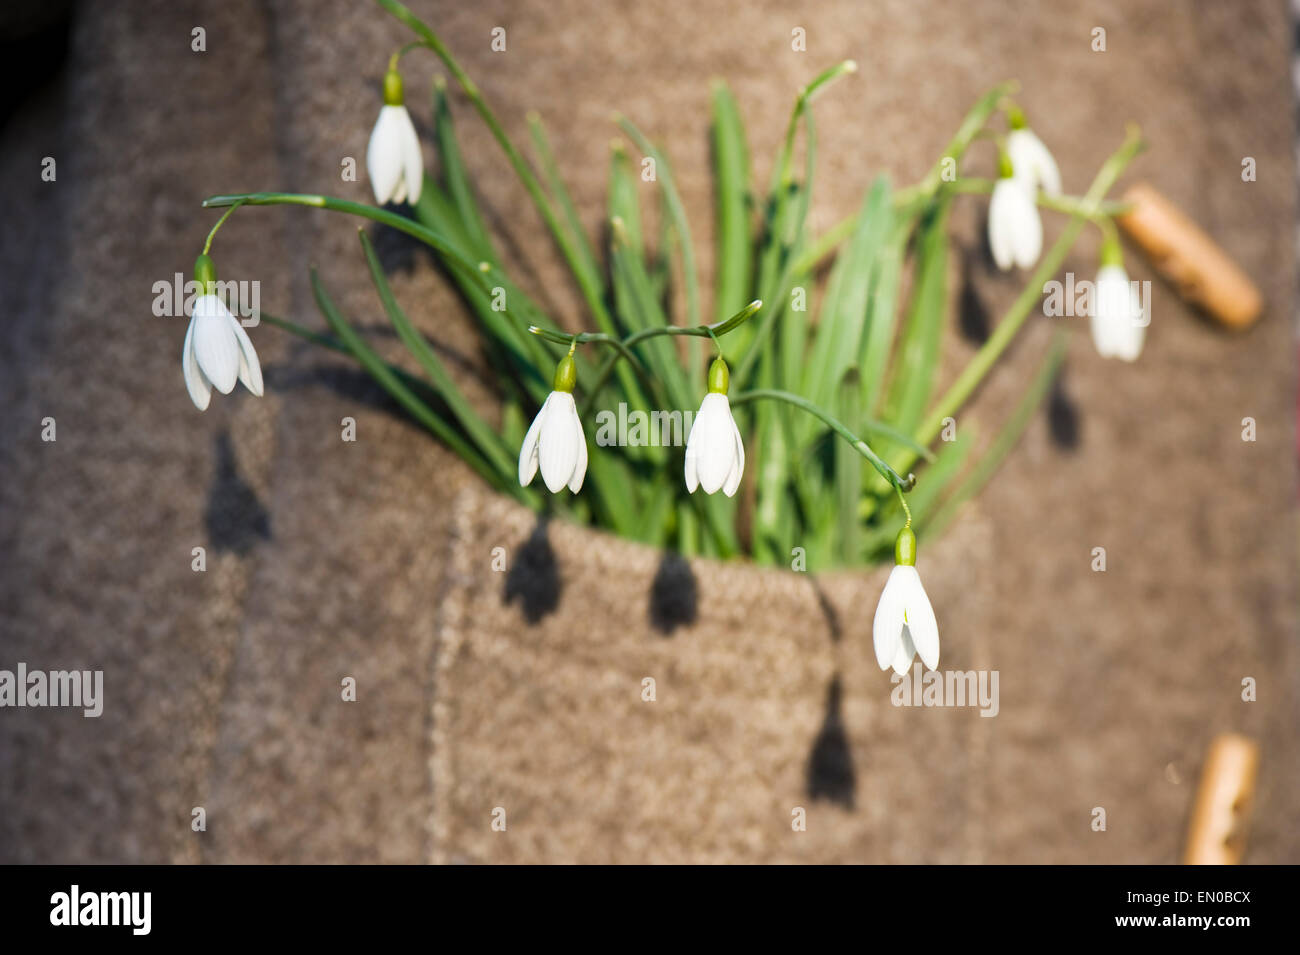 Snowdrop (Galanthus nivalis) in a  pocket of a woolen jacket Stock Photo